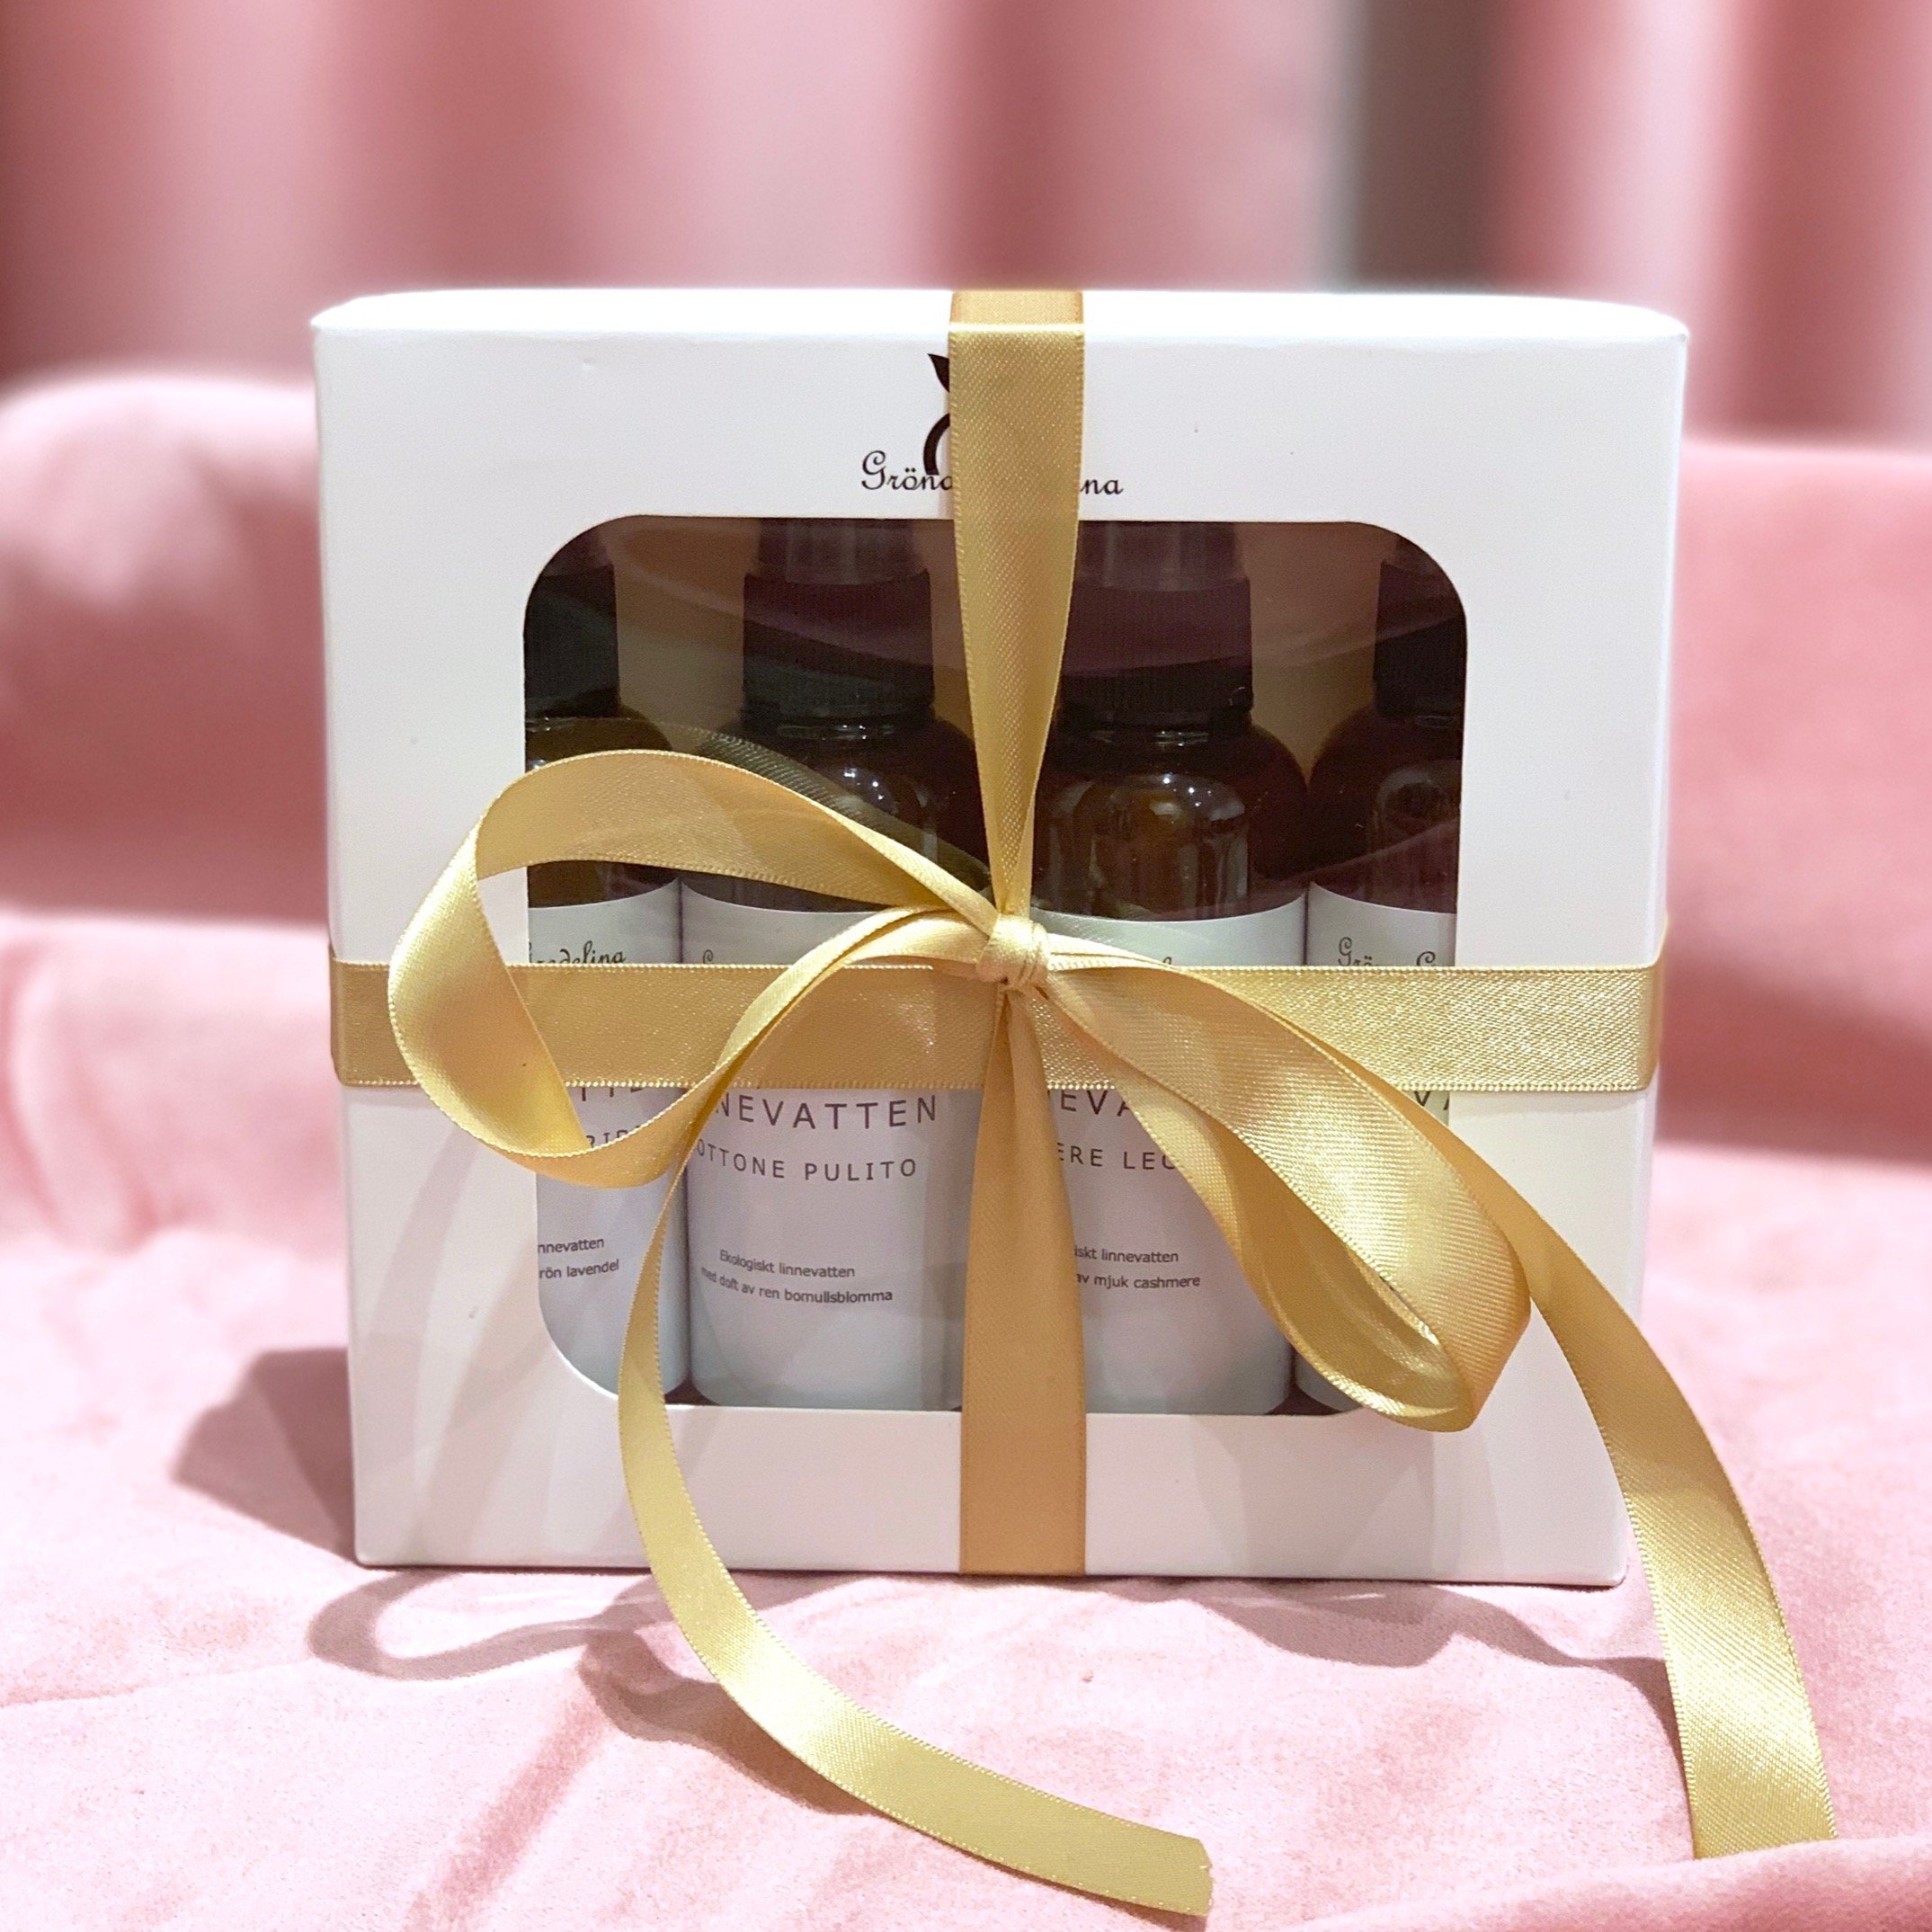 Fragranced linen water in a gift package